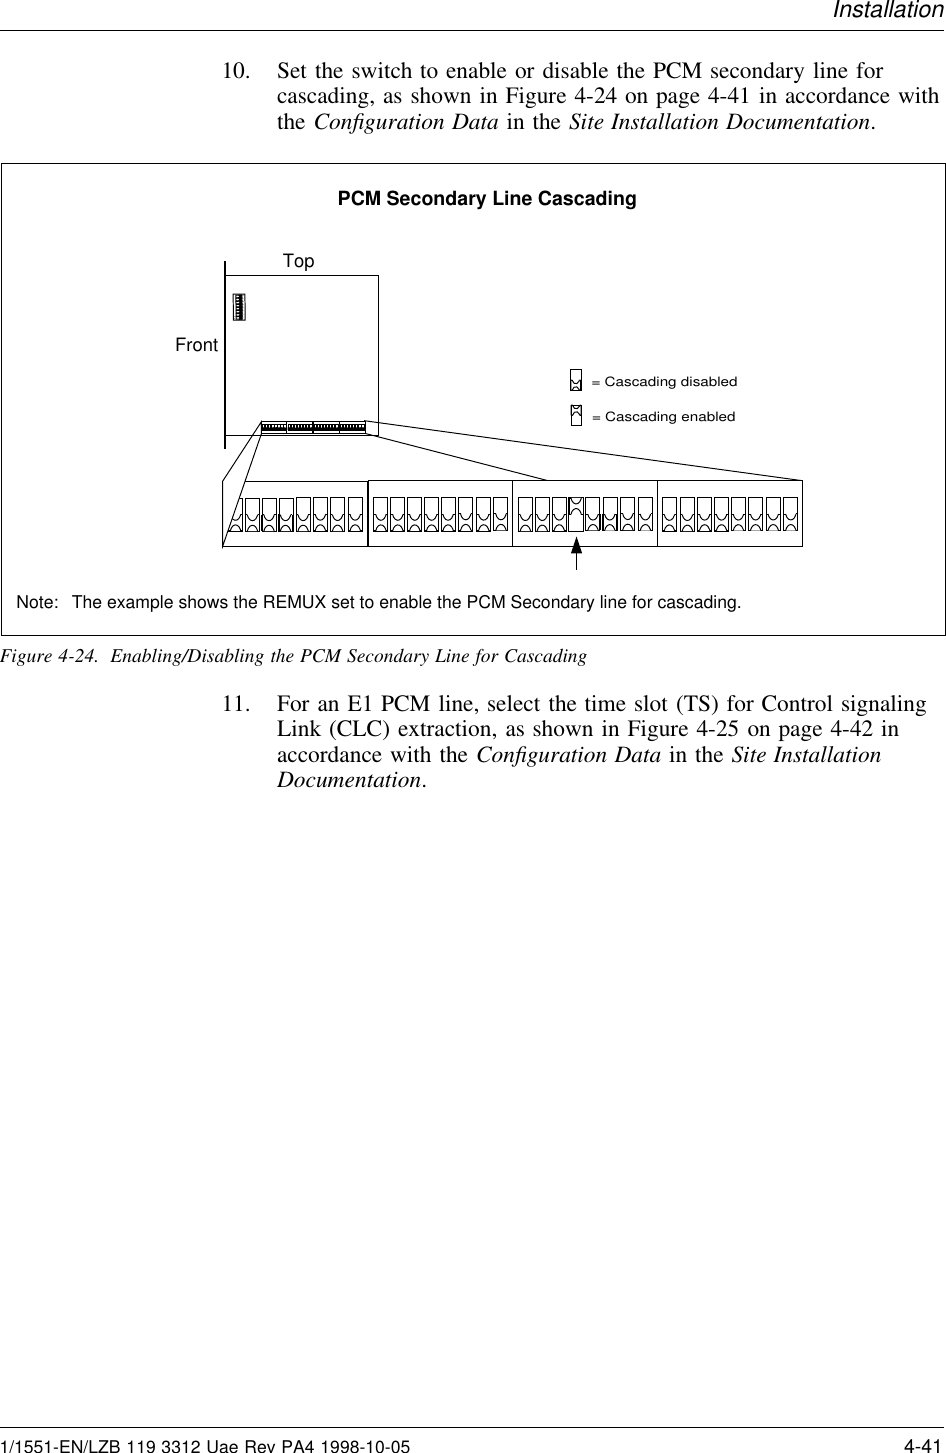 Installation10. Set the switch to enable or disable the PCM secondary line forcascading, as shown in Figure 4-24 on page 4-41 in accordance withthe Conﬁguration Data in the Site Installation Documentation.= Cascading enabled= Cascading disabledTop12345678ONFrontPCM Secondary Line CascadingNote: The example shows the REMUX set to enable the PCM Secondary line for cascading.Figure 4-24. Enabling/Disabling the PCM Secondary Line for Cascading11. For an E1 PCM line, select the time slot (TS) for Control signalingLink (CLC) extraction, as shown in Figure 4-25 on page 4-42 inaccordance with the Conﬁguration Data in the Site InstallationDocumentation.1/1551-EN/LZB 119 3312 Uae Rev PA4 1998-10-05 4-41